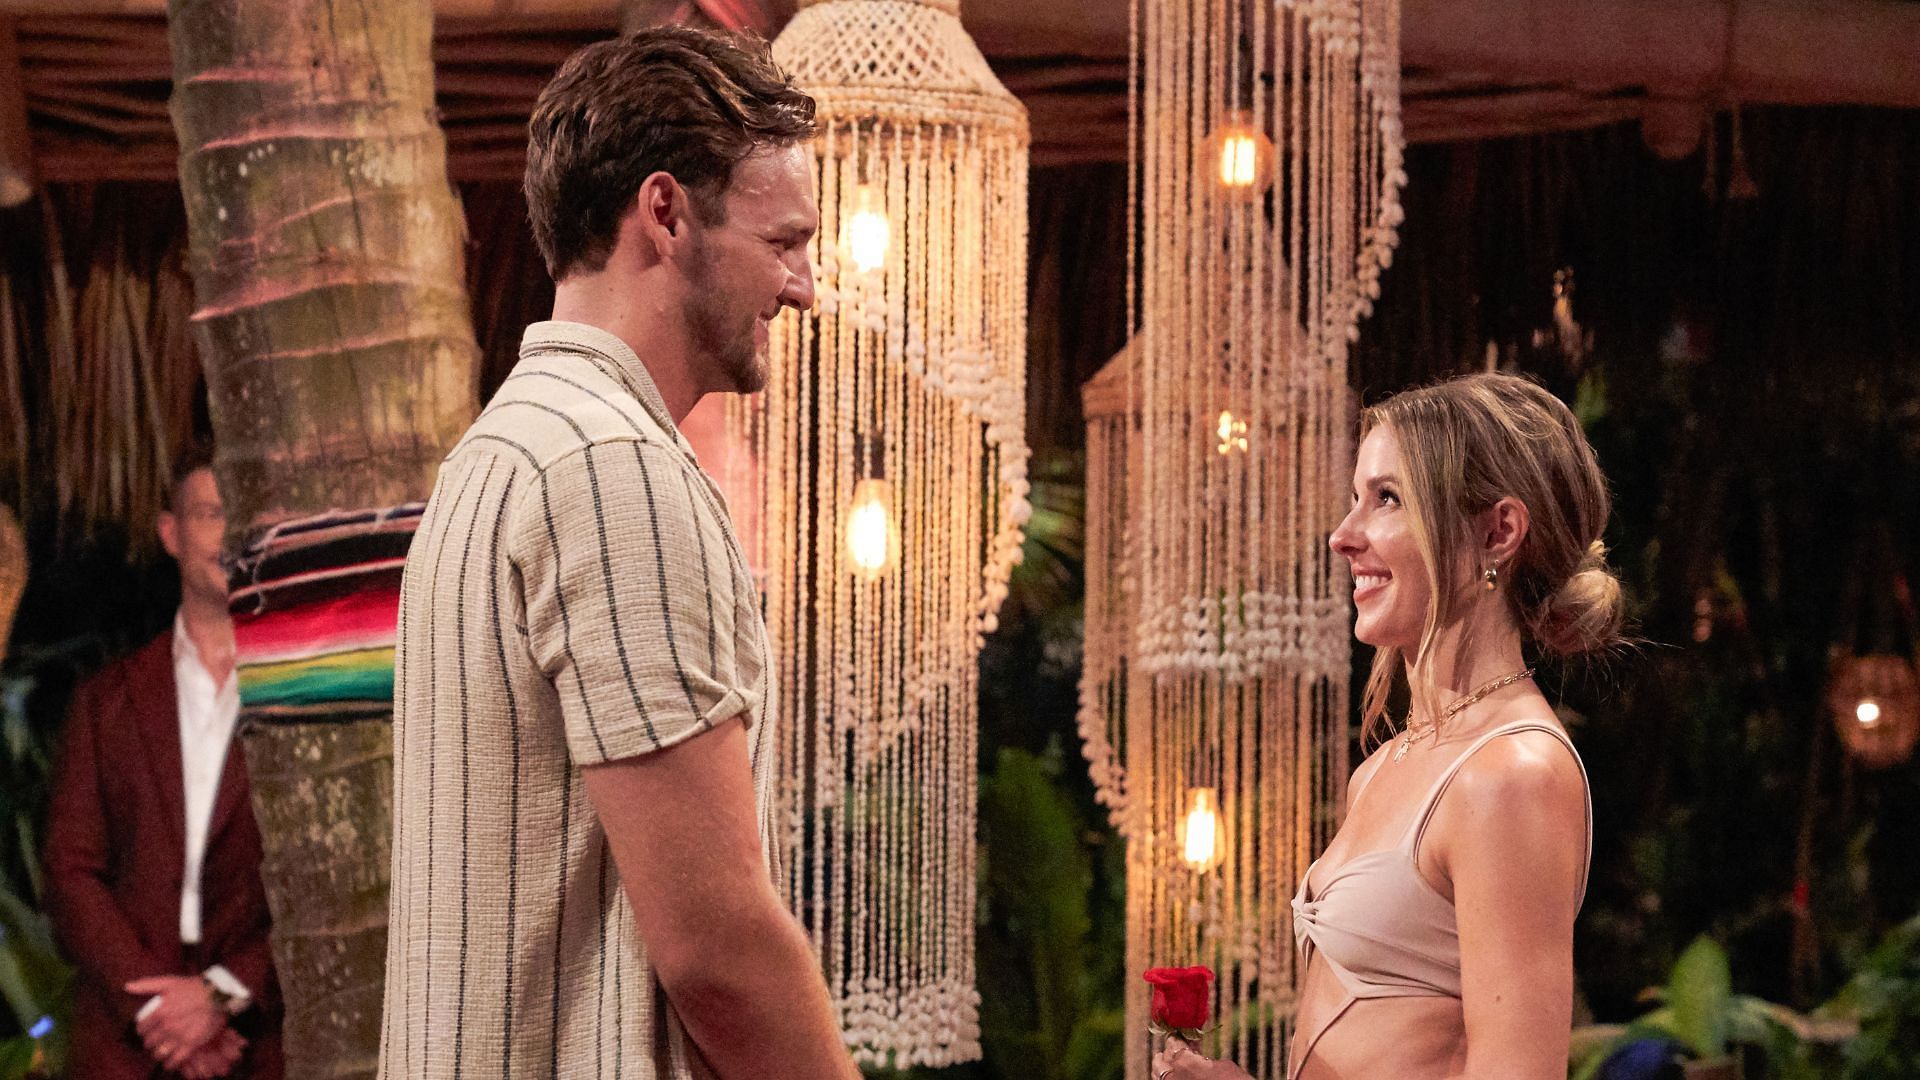 Kate criticizes Logan on Bachelor in Paradise